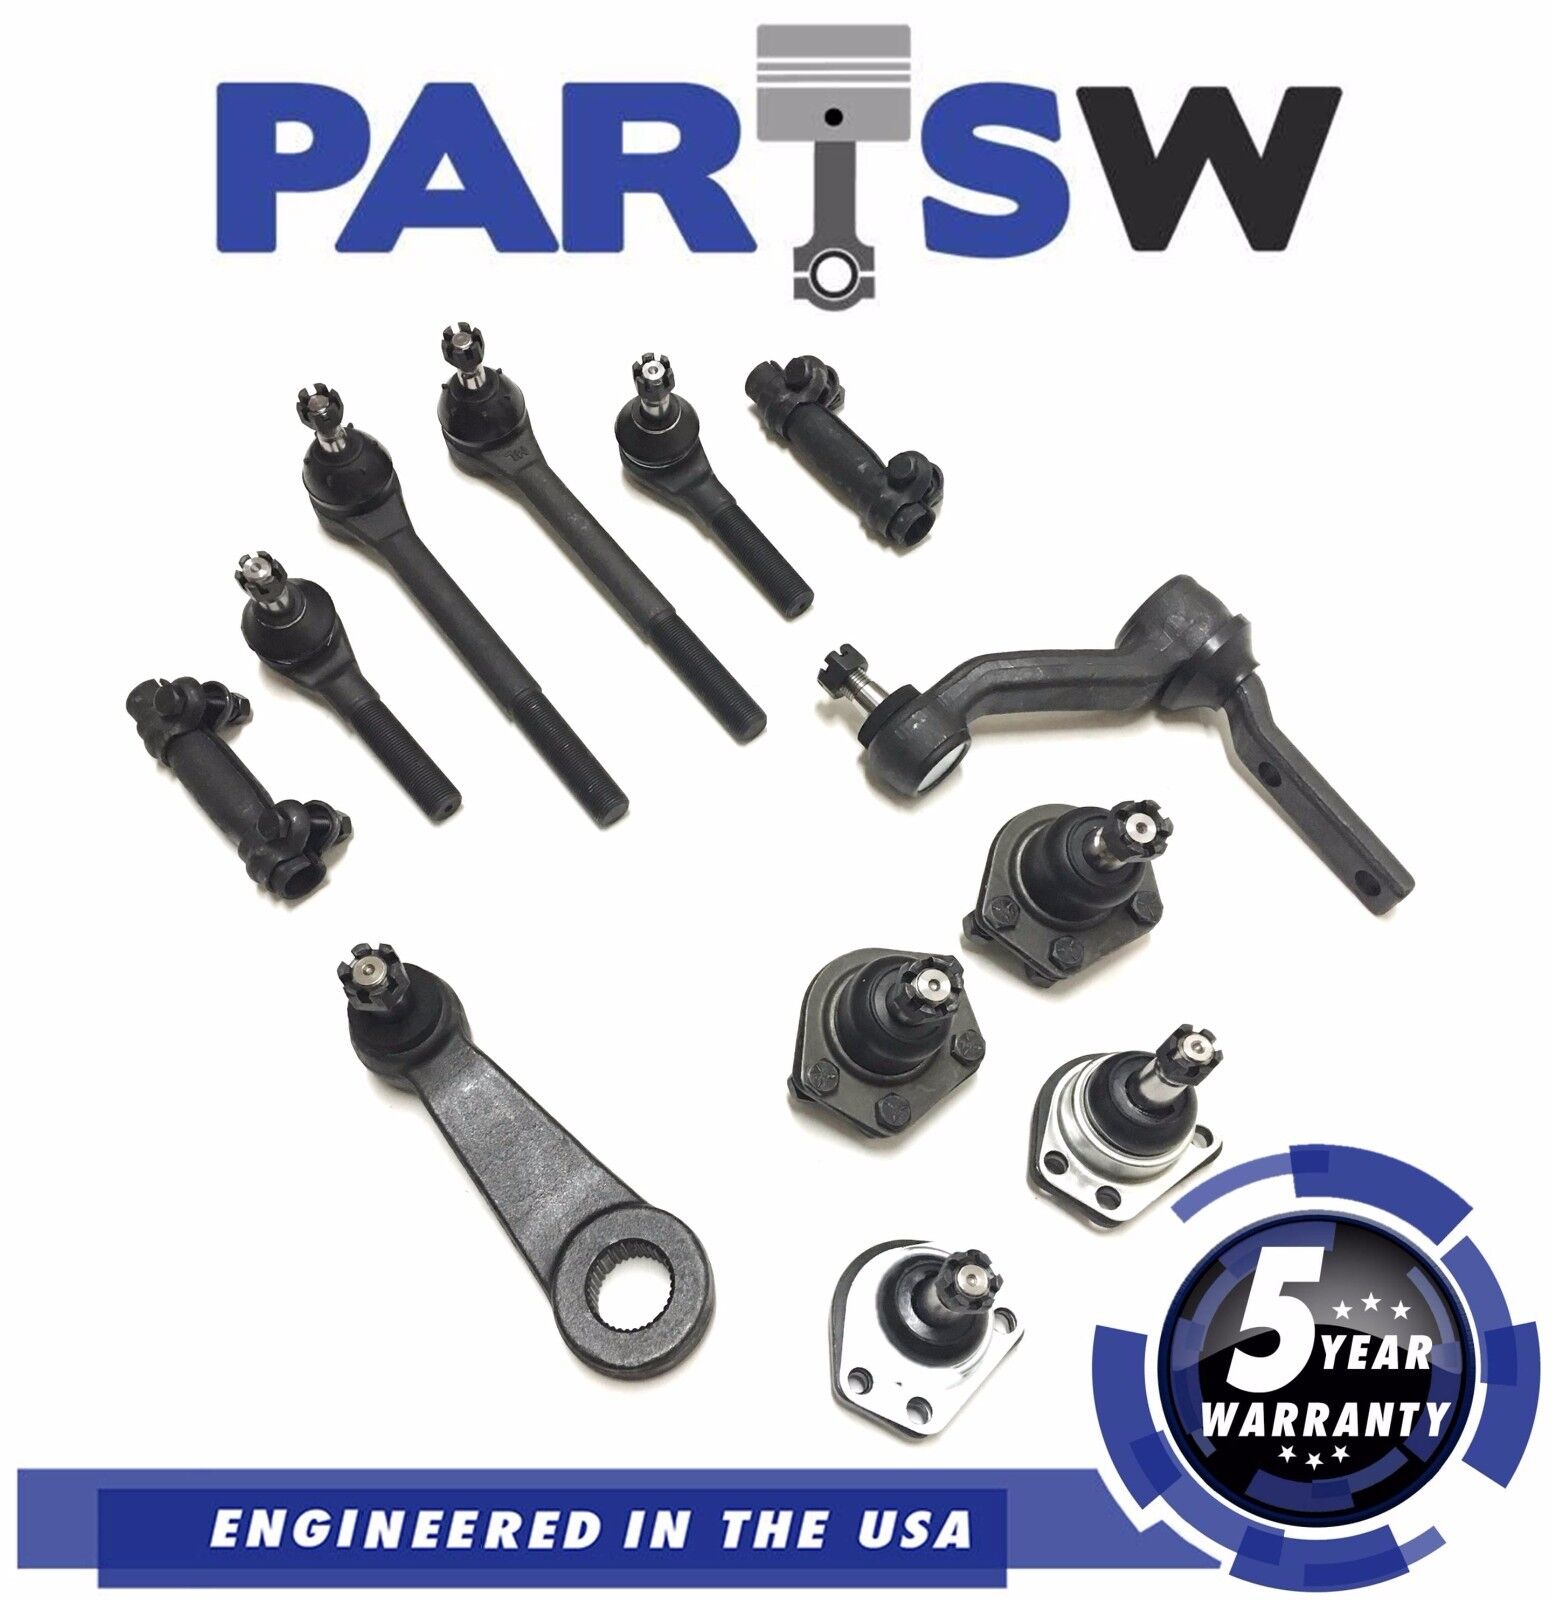 12 PC Ball Joints Tie Rod Ends Kit for S10 Blazer Bravada Jimmy S15 Sonoma